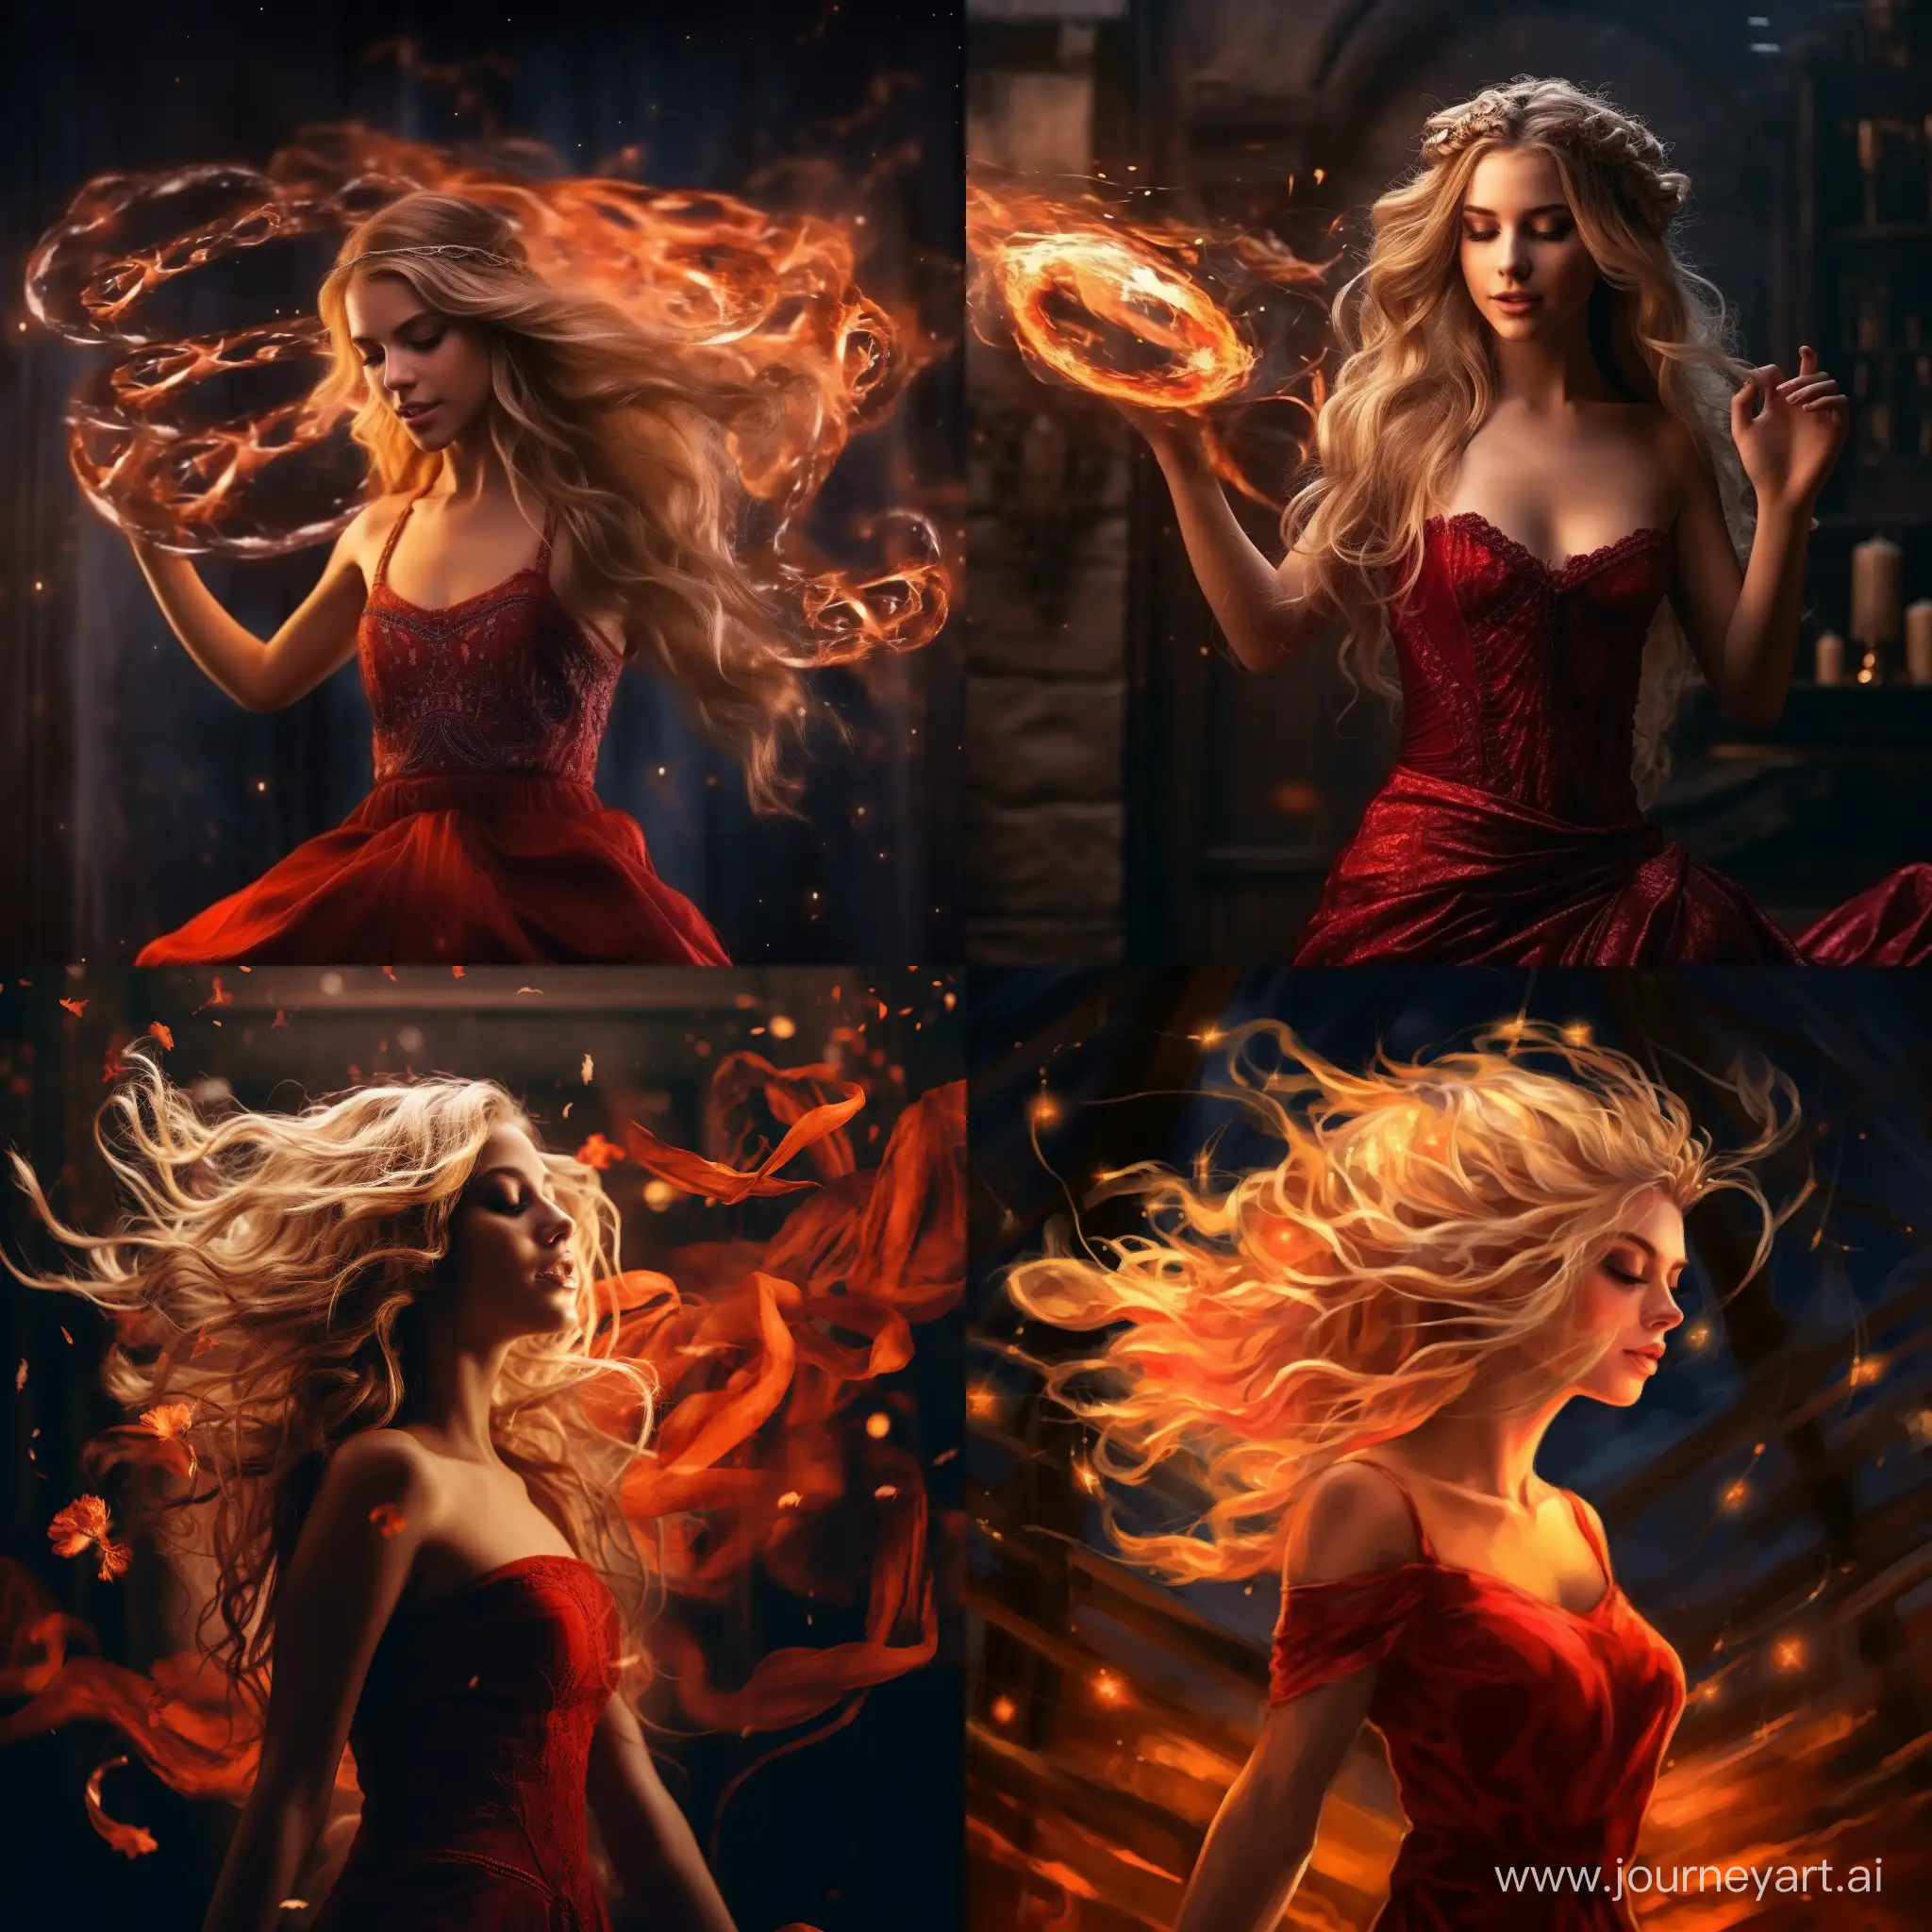 Ethereal-Fire-Dance-Enchanting-Blonde-Girl-in-Red-Dress-with-Golden-Crown